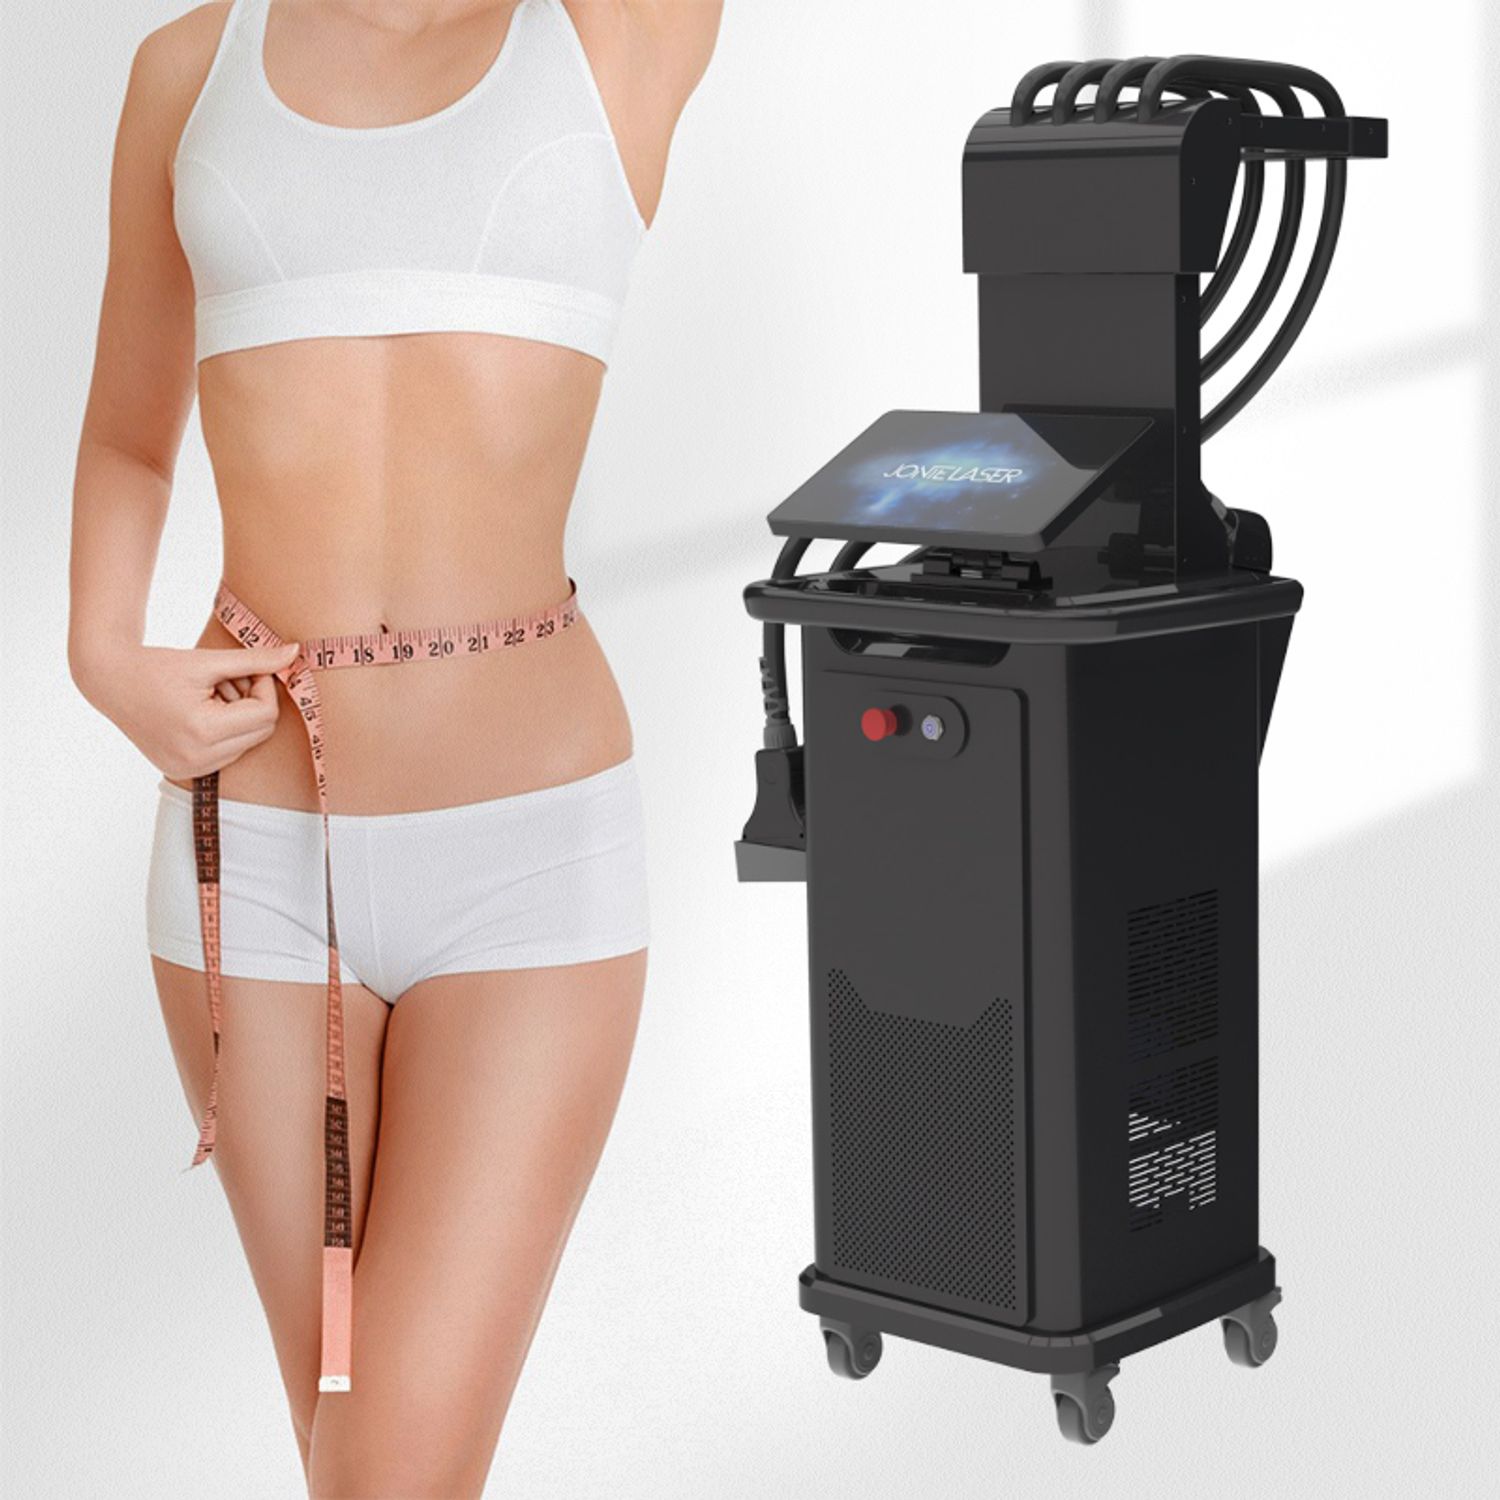 A professional laser lipo machine stands next to a woman measuring her waist